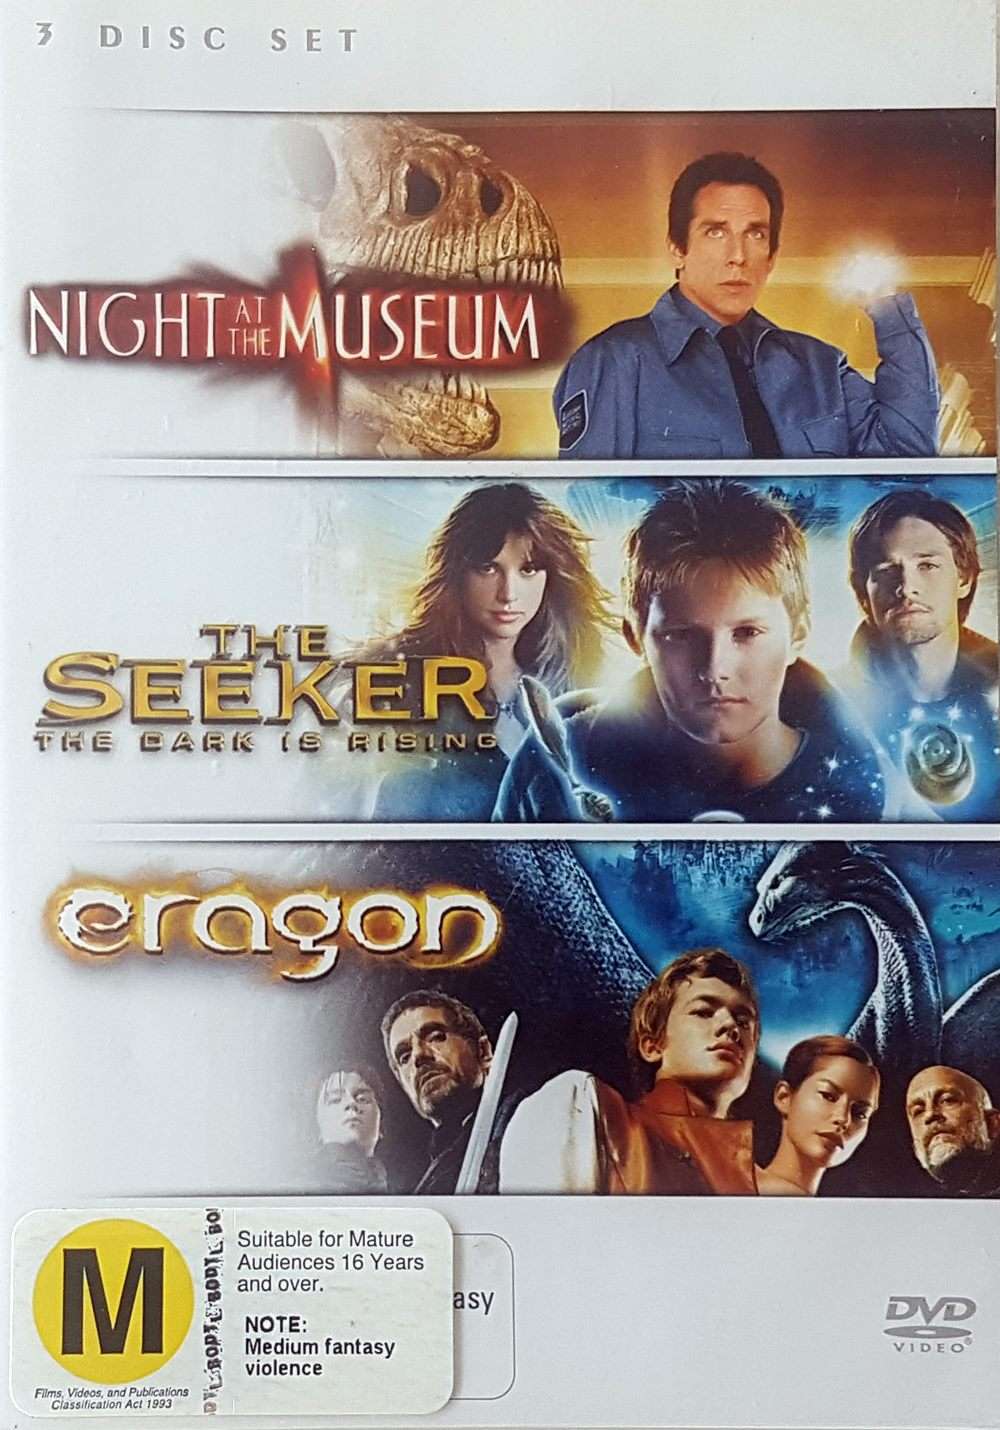 Night at the Museum / The Seeker / Eragon